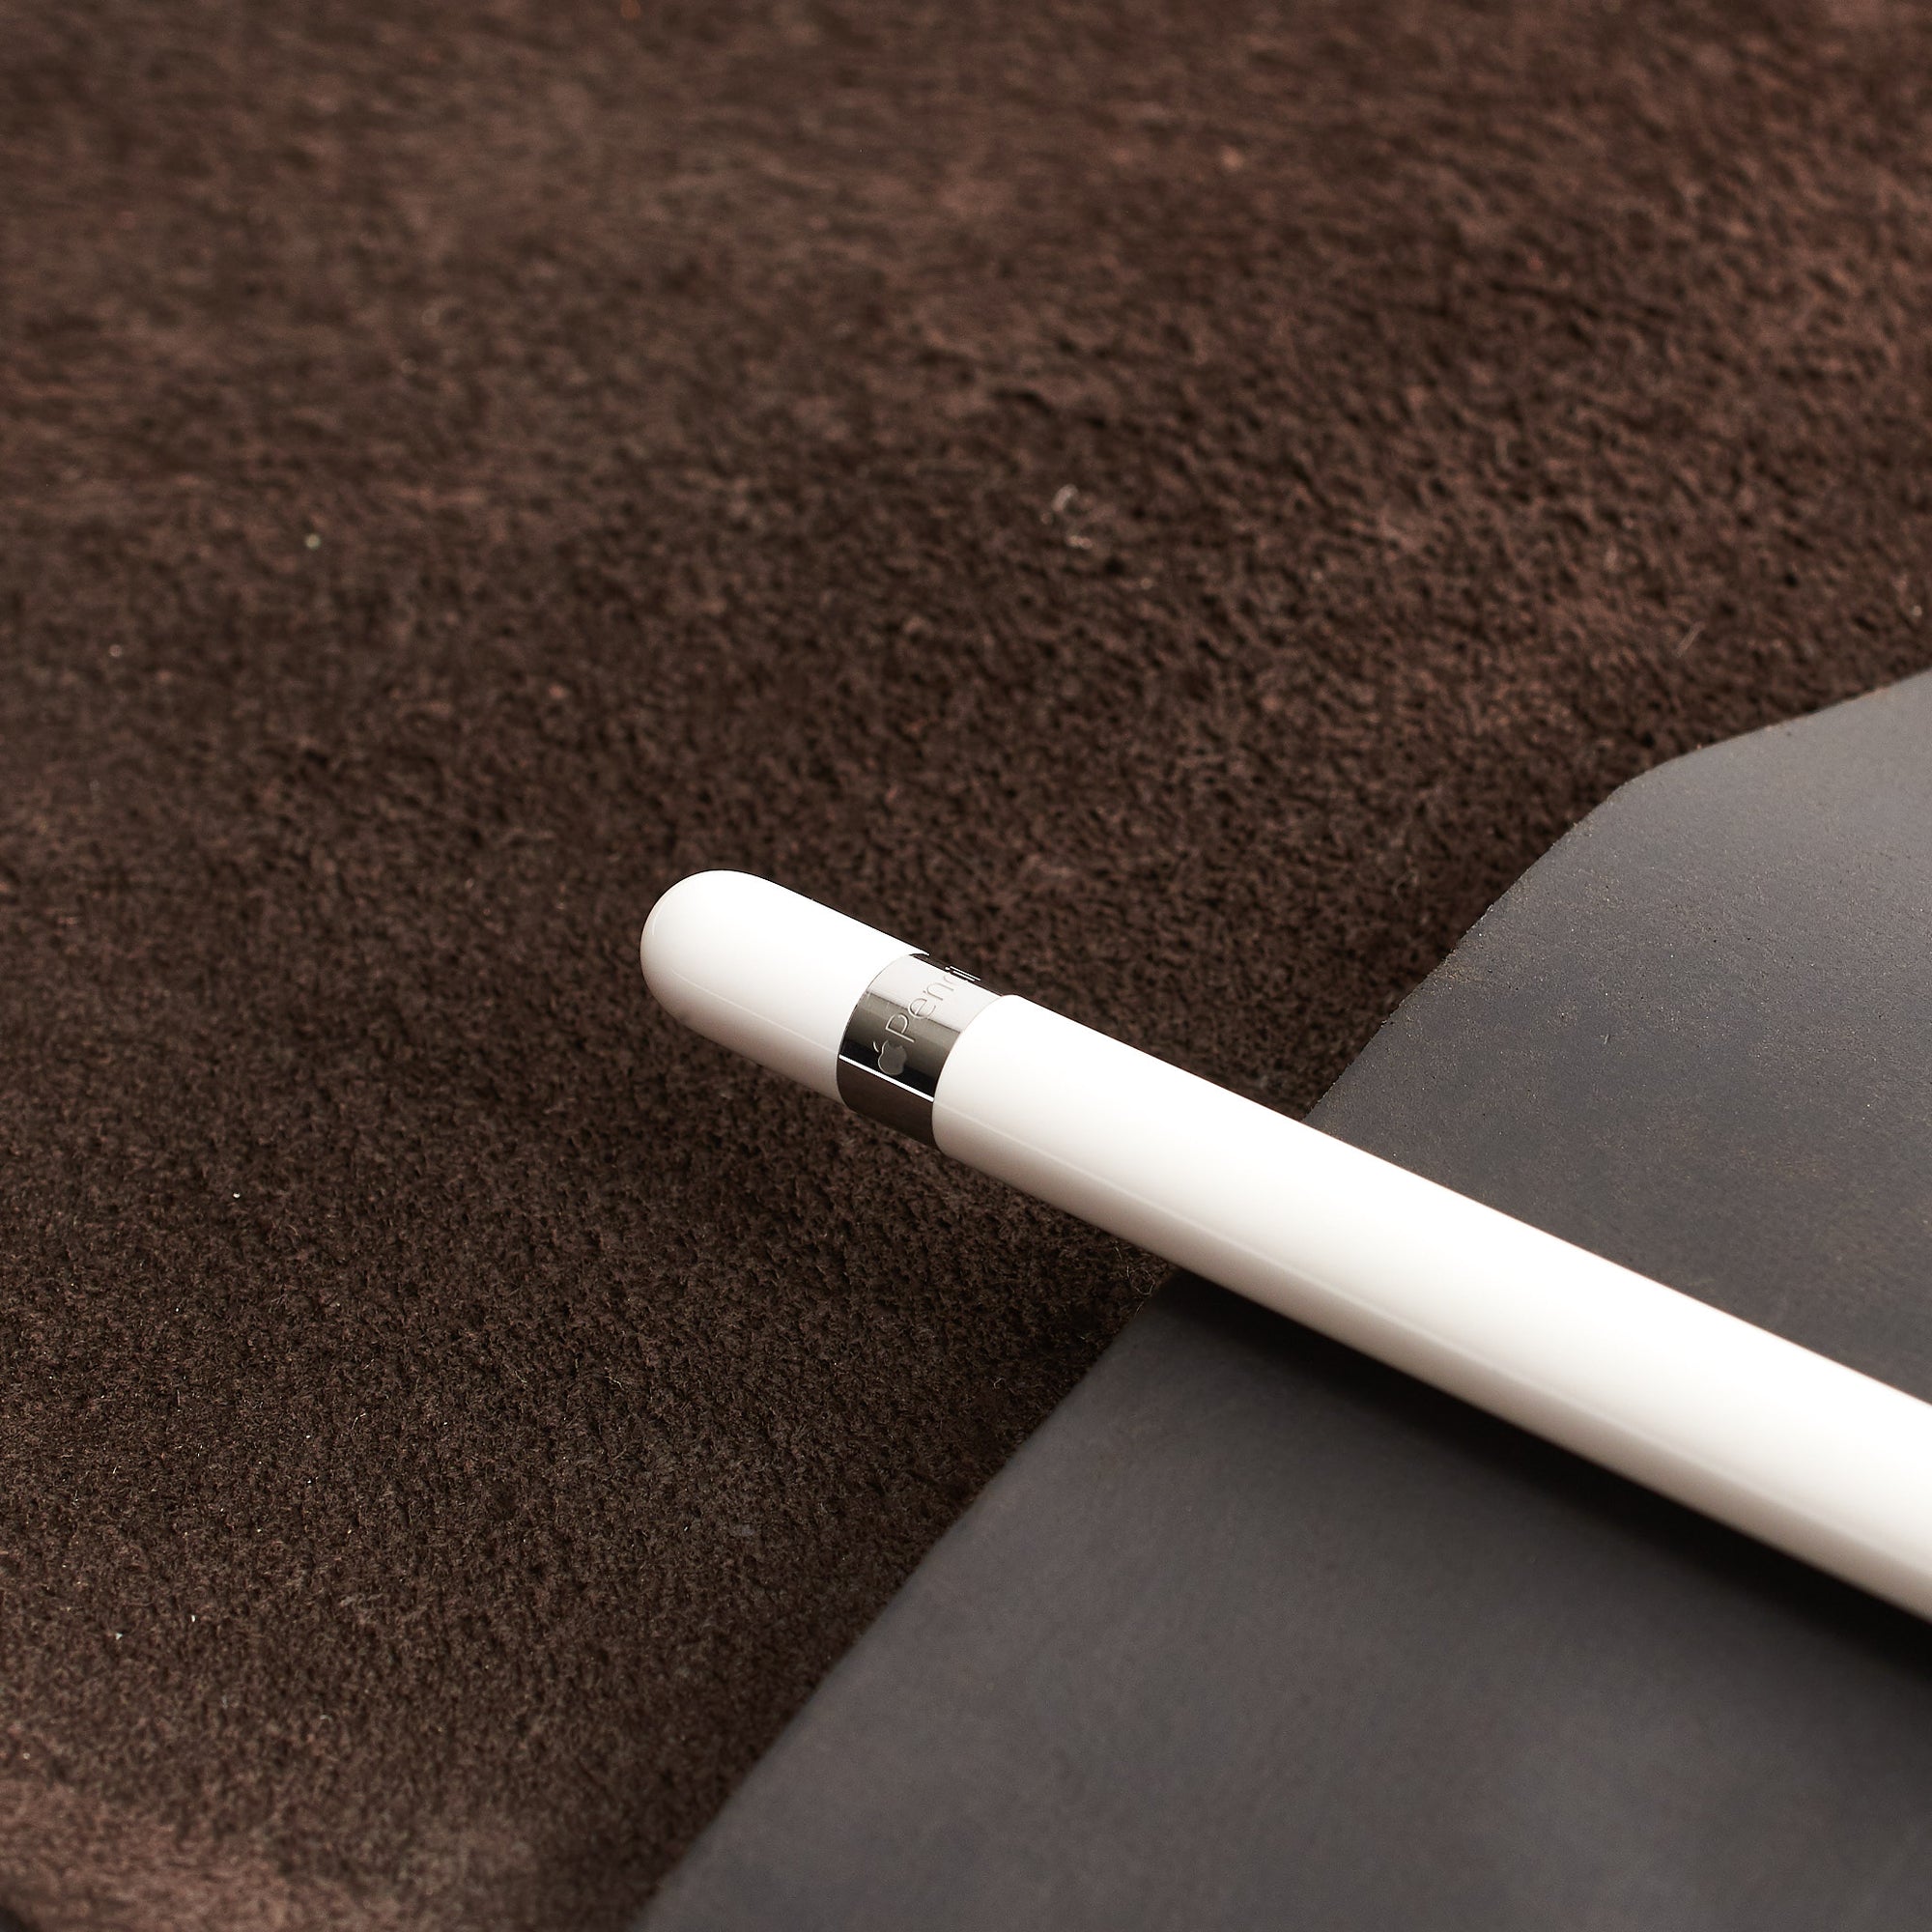 Apple pencil detail. Brown iPad pro leather case with pen holder